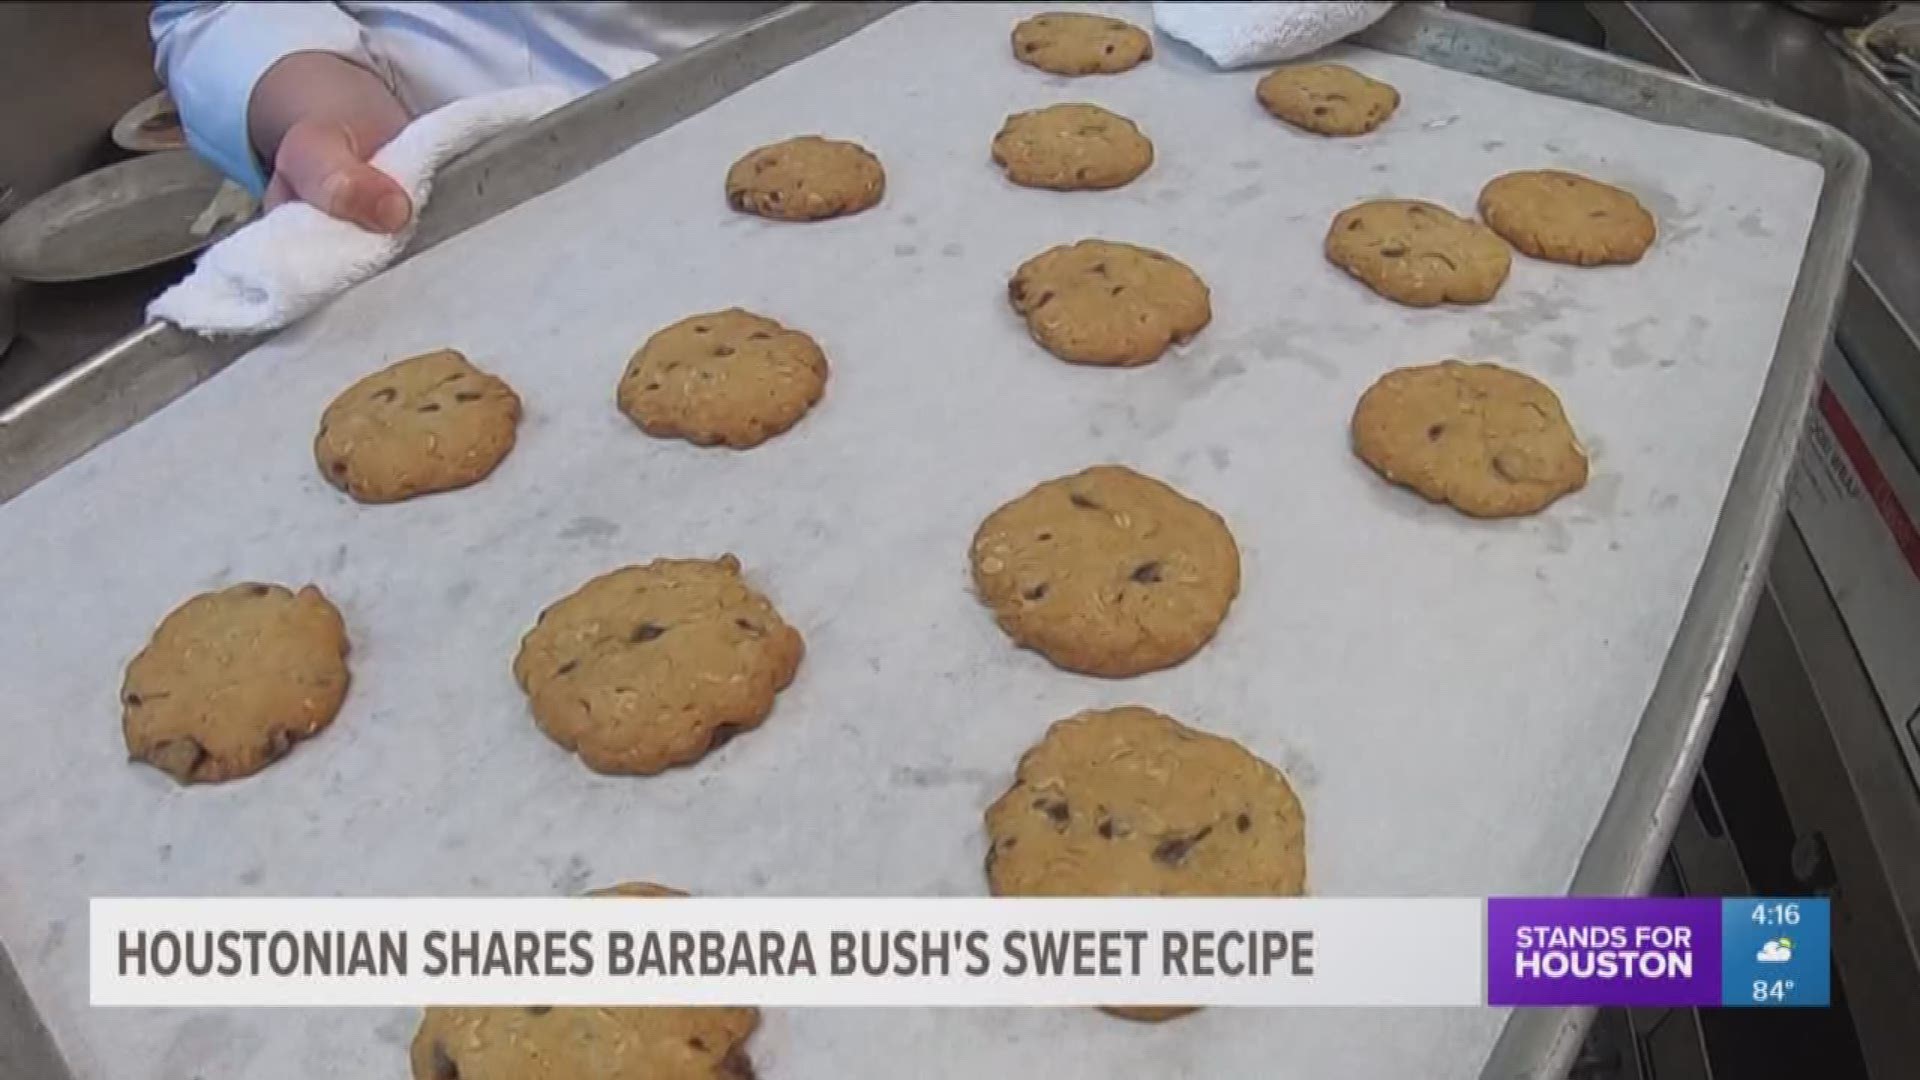 The Houstonian Hotel is sharing the late Barbara Bush's award-winning chocolate chip cookie recipe a week after the former First Lady passed away